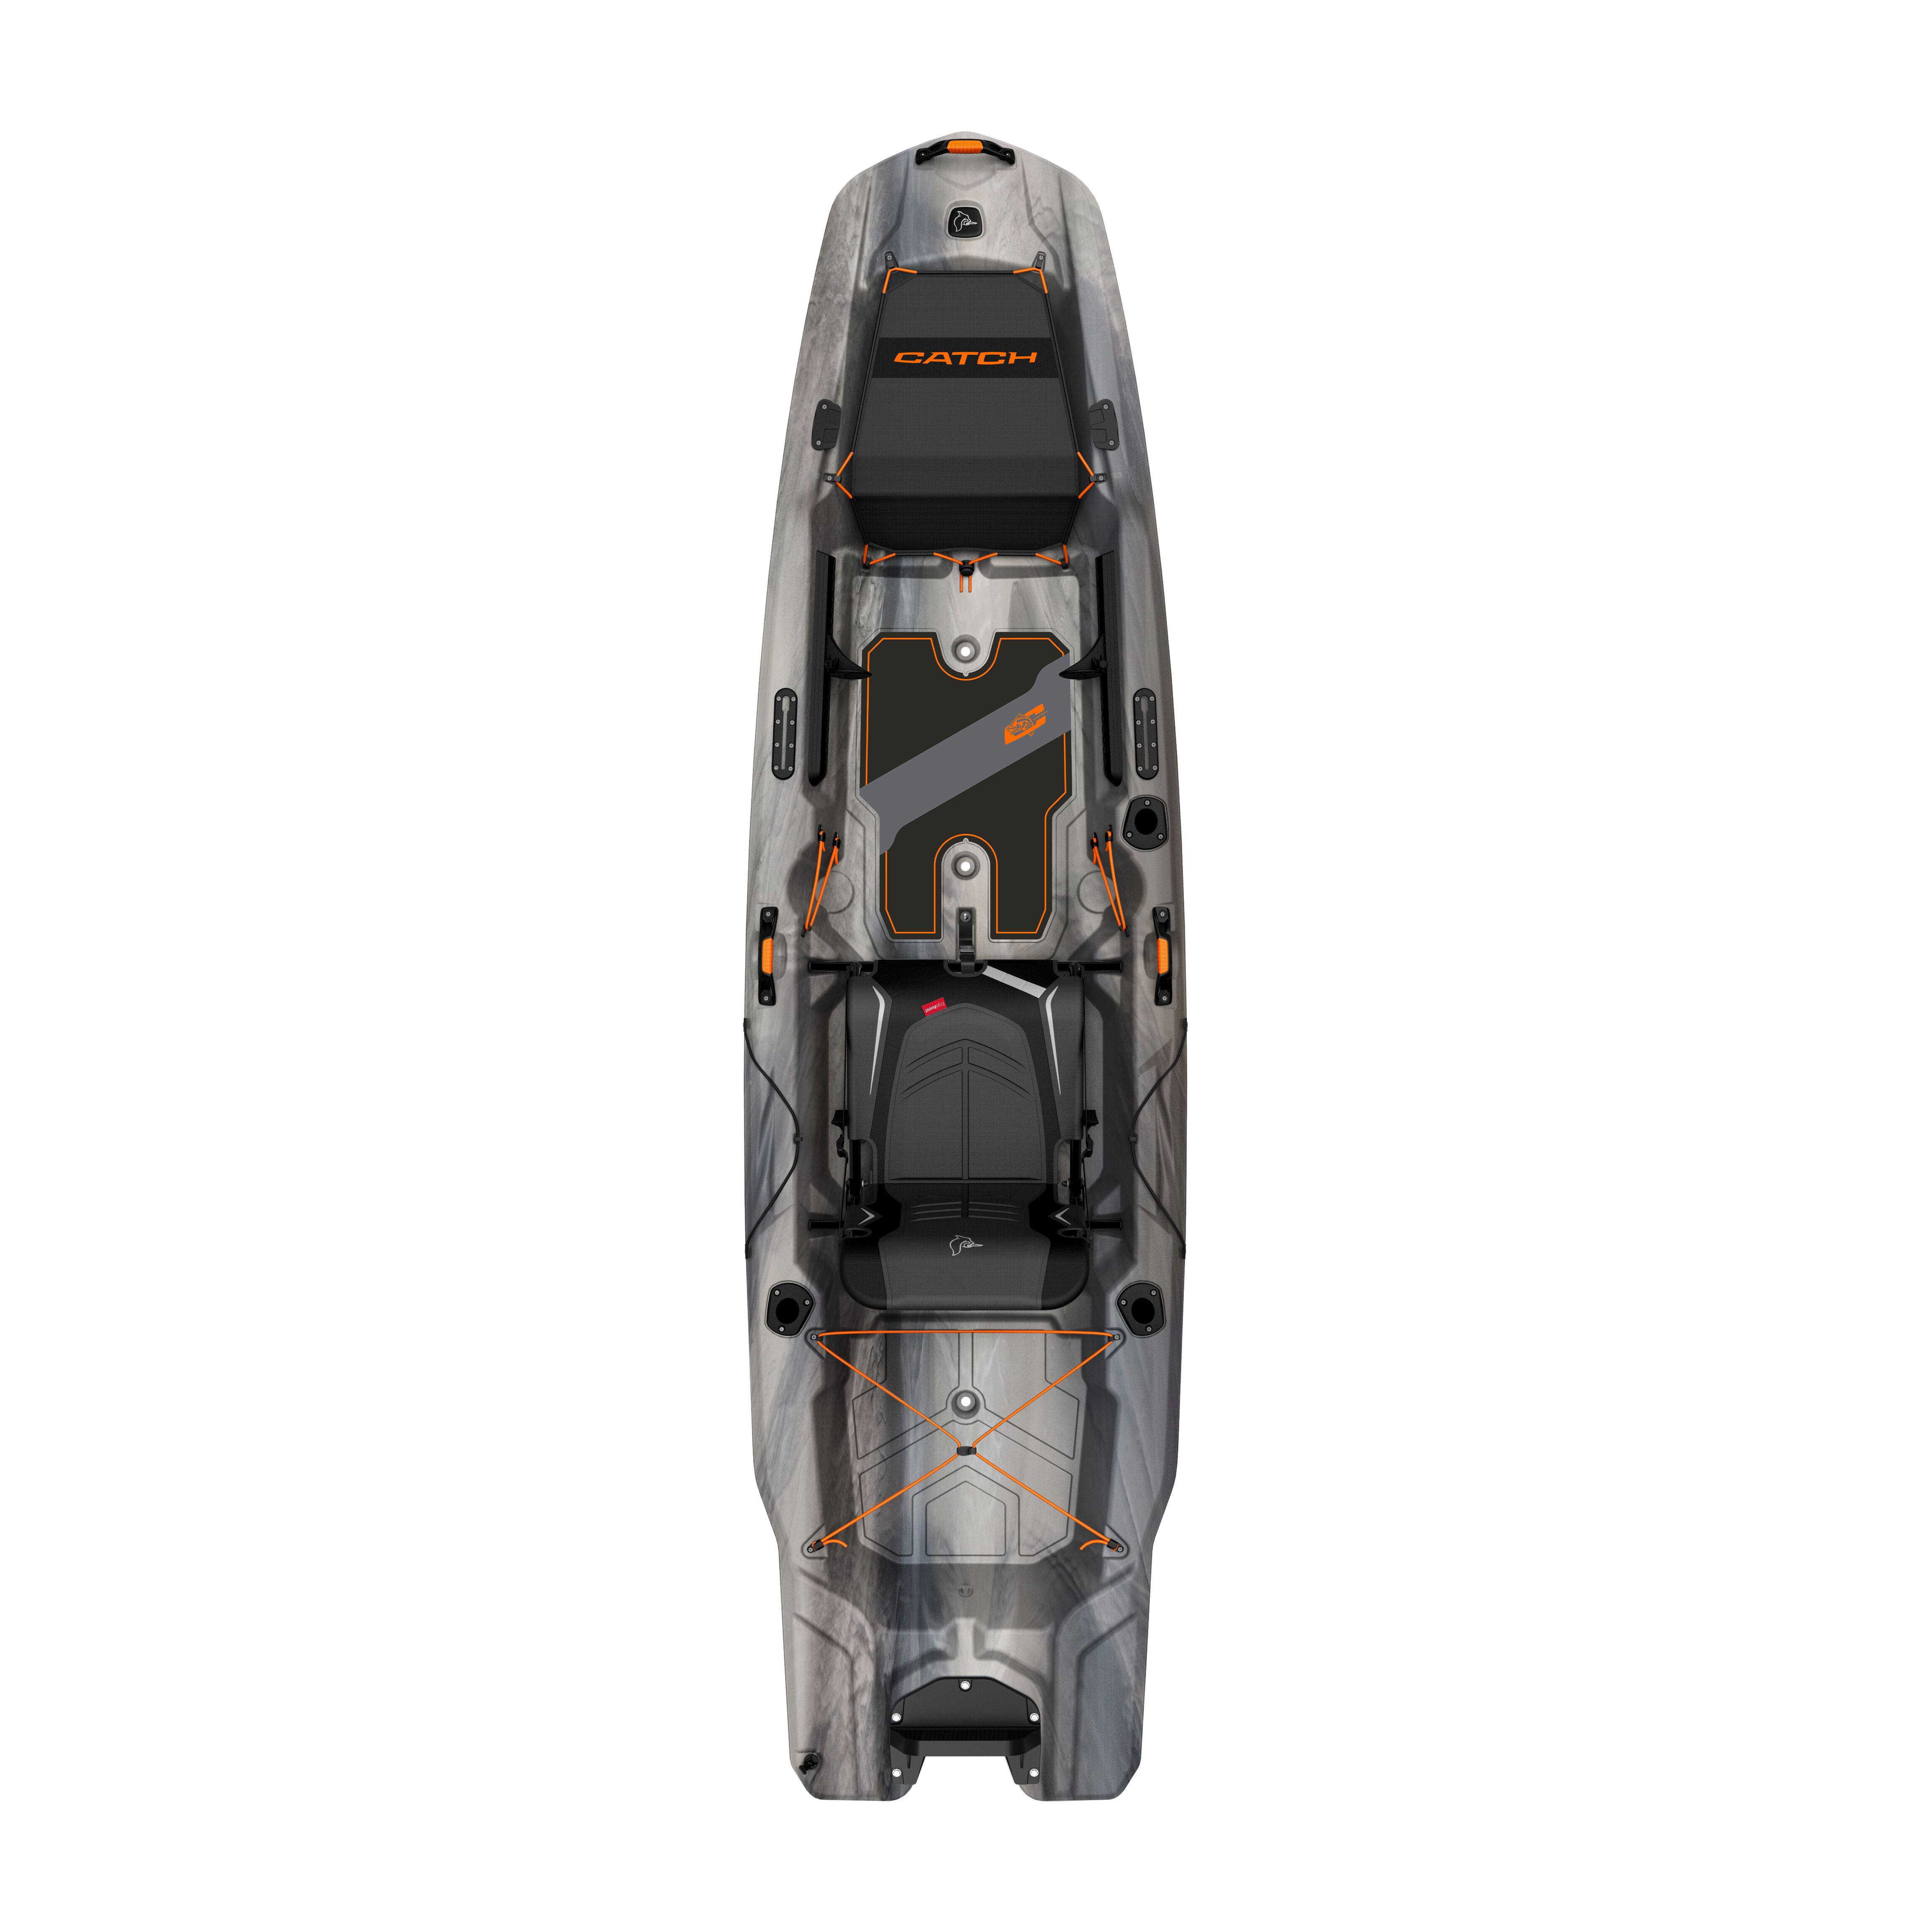 Pelican Catch Mode 110. Review and Fishability 